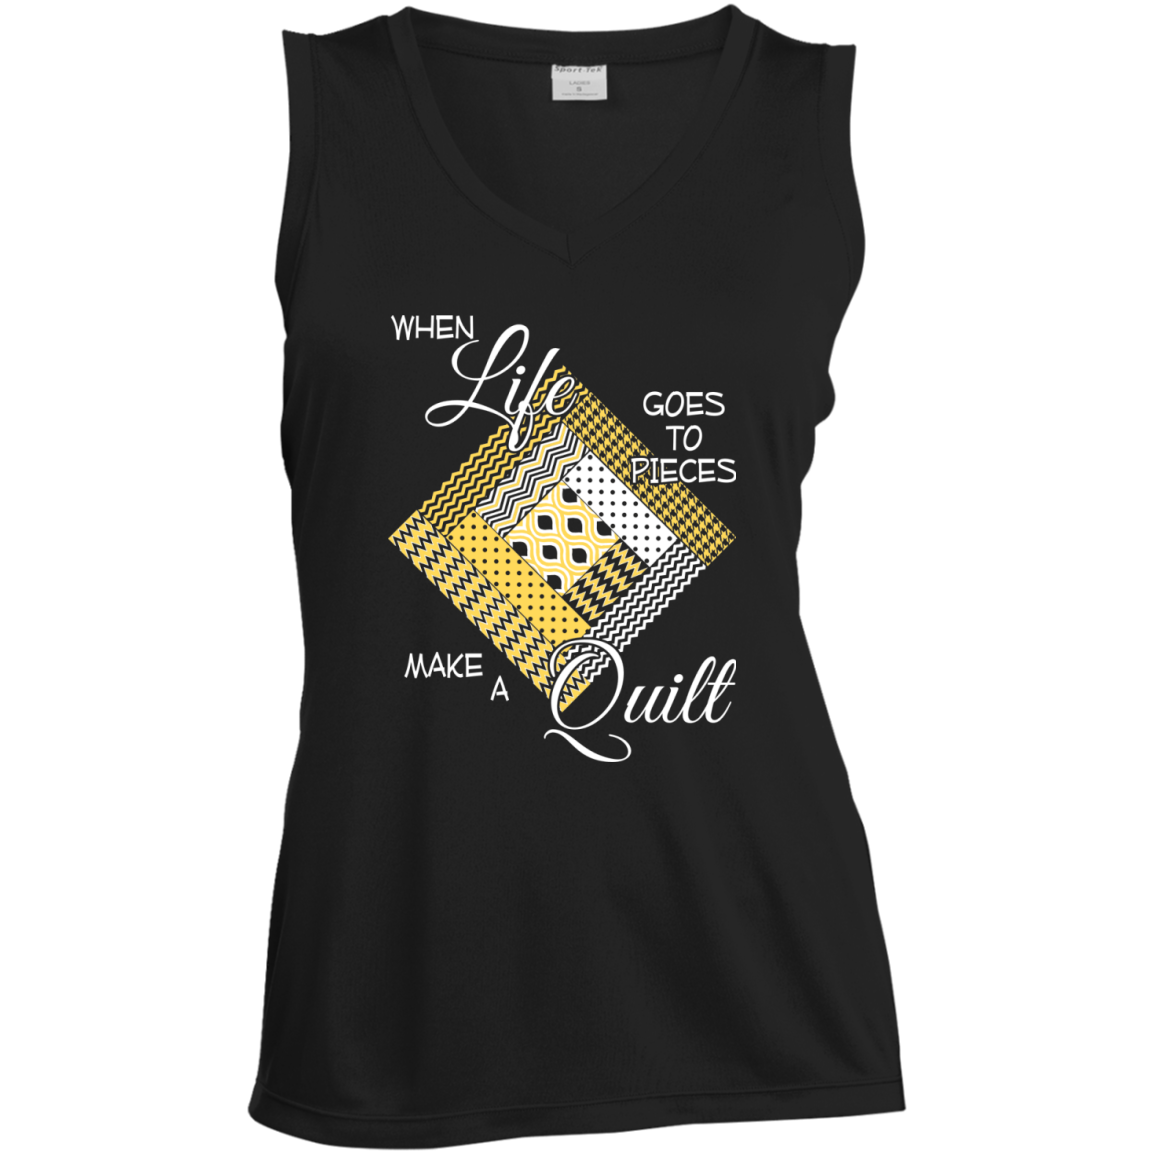 Make a Quilt (yellow) Ladies Sleeveless V-Neck - Crafter4Life - 2